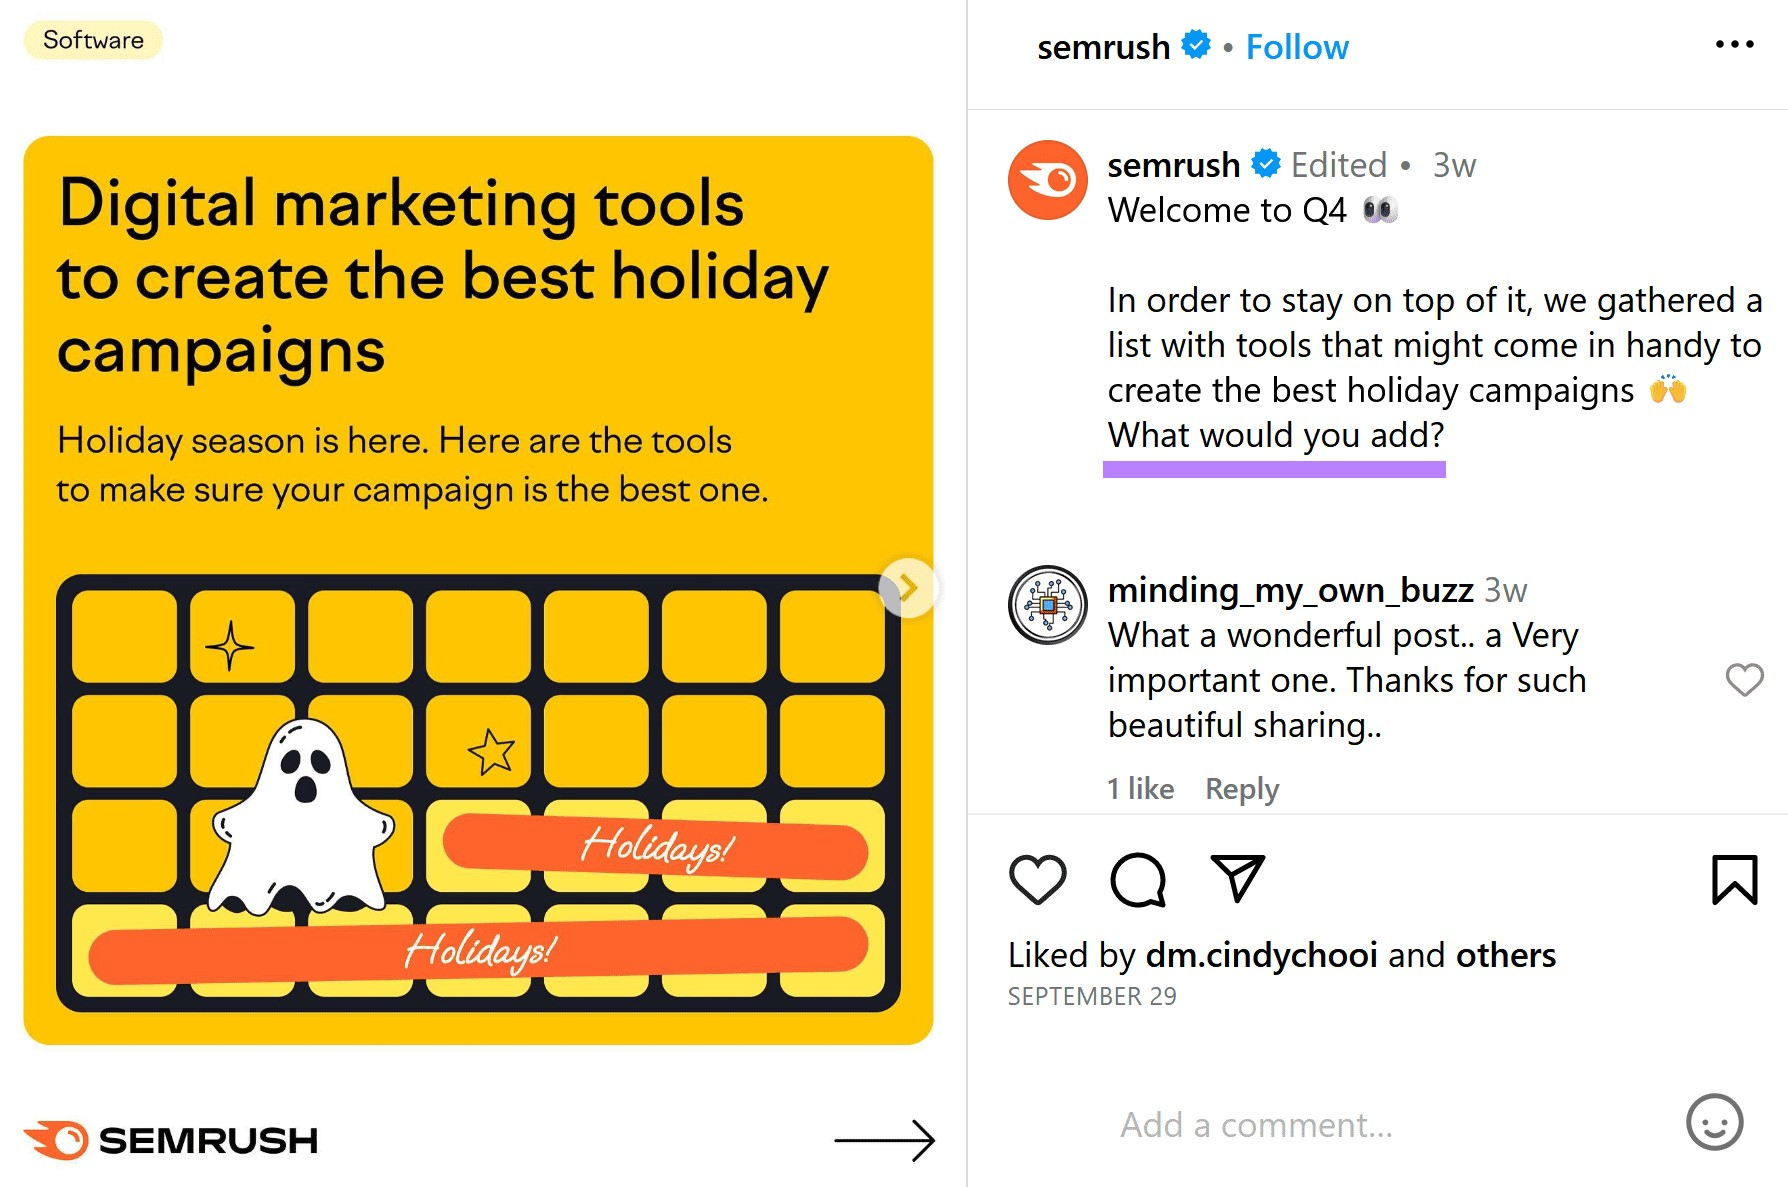 Semrush's Instagram post asking users "What would you add?"